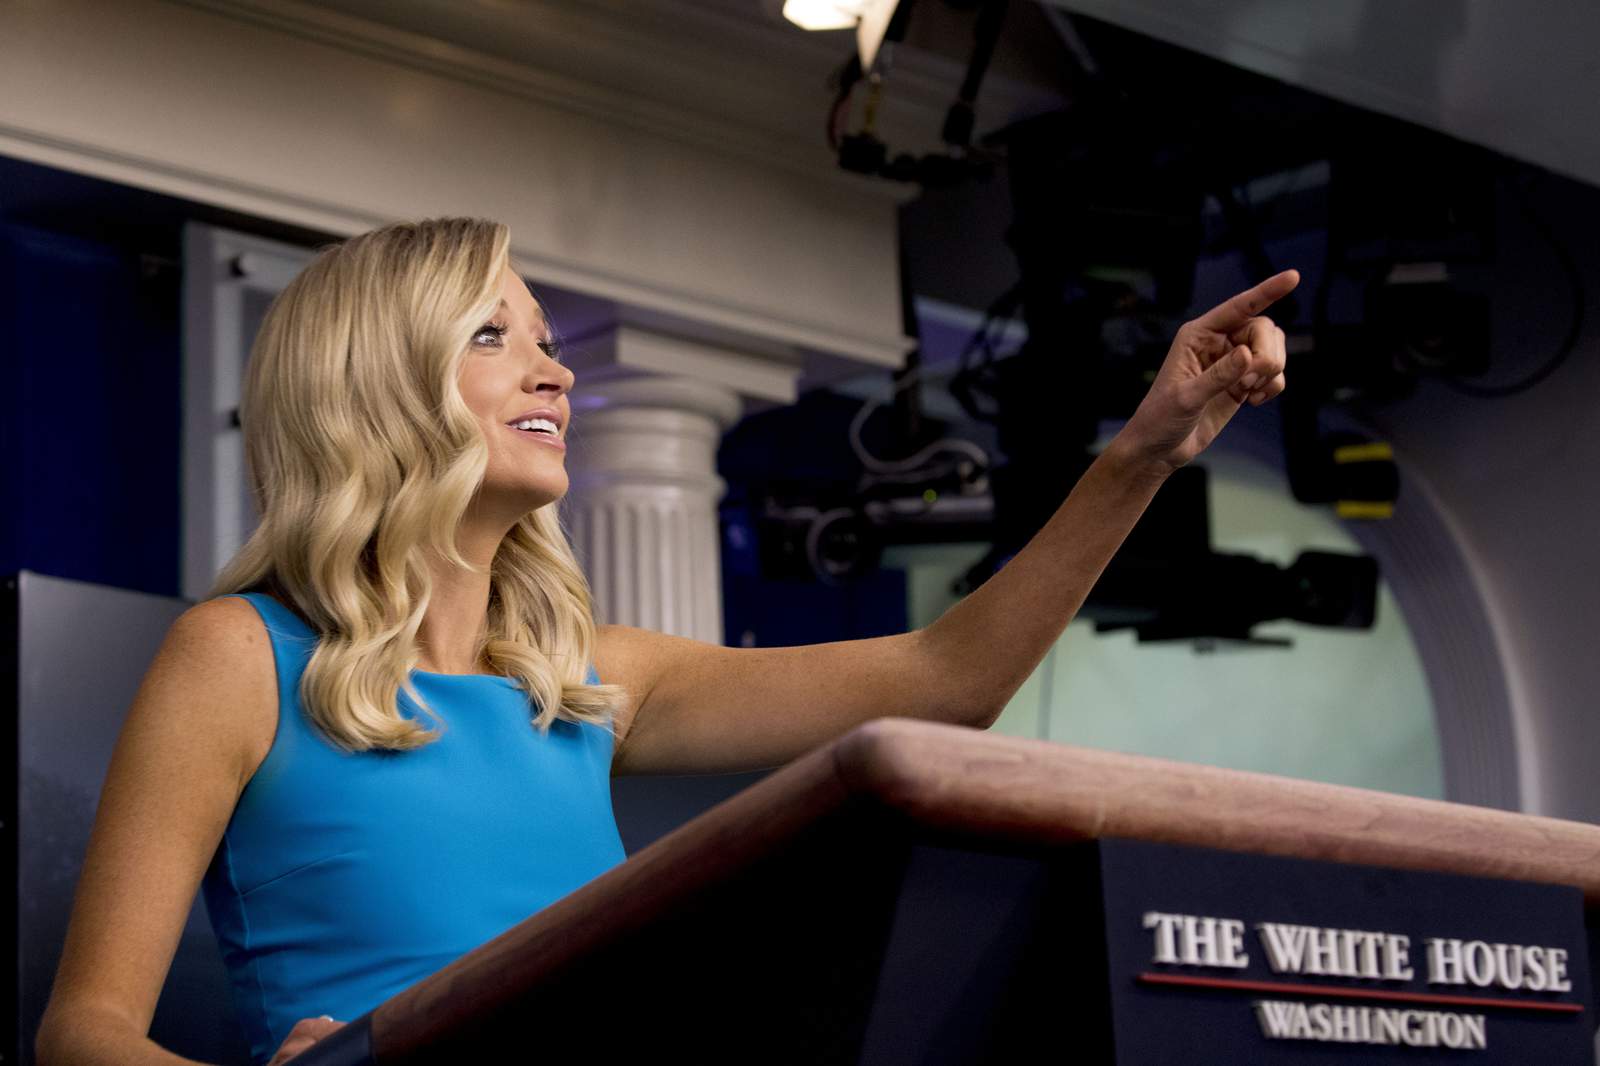 McEnany's mission: Stand by, defend, punch back for Trump